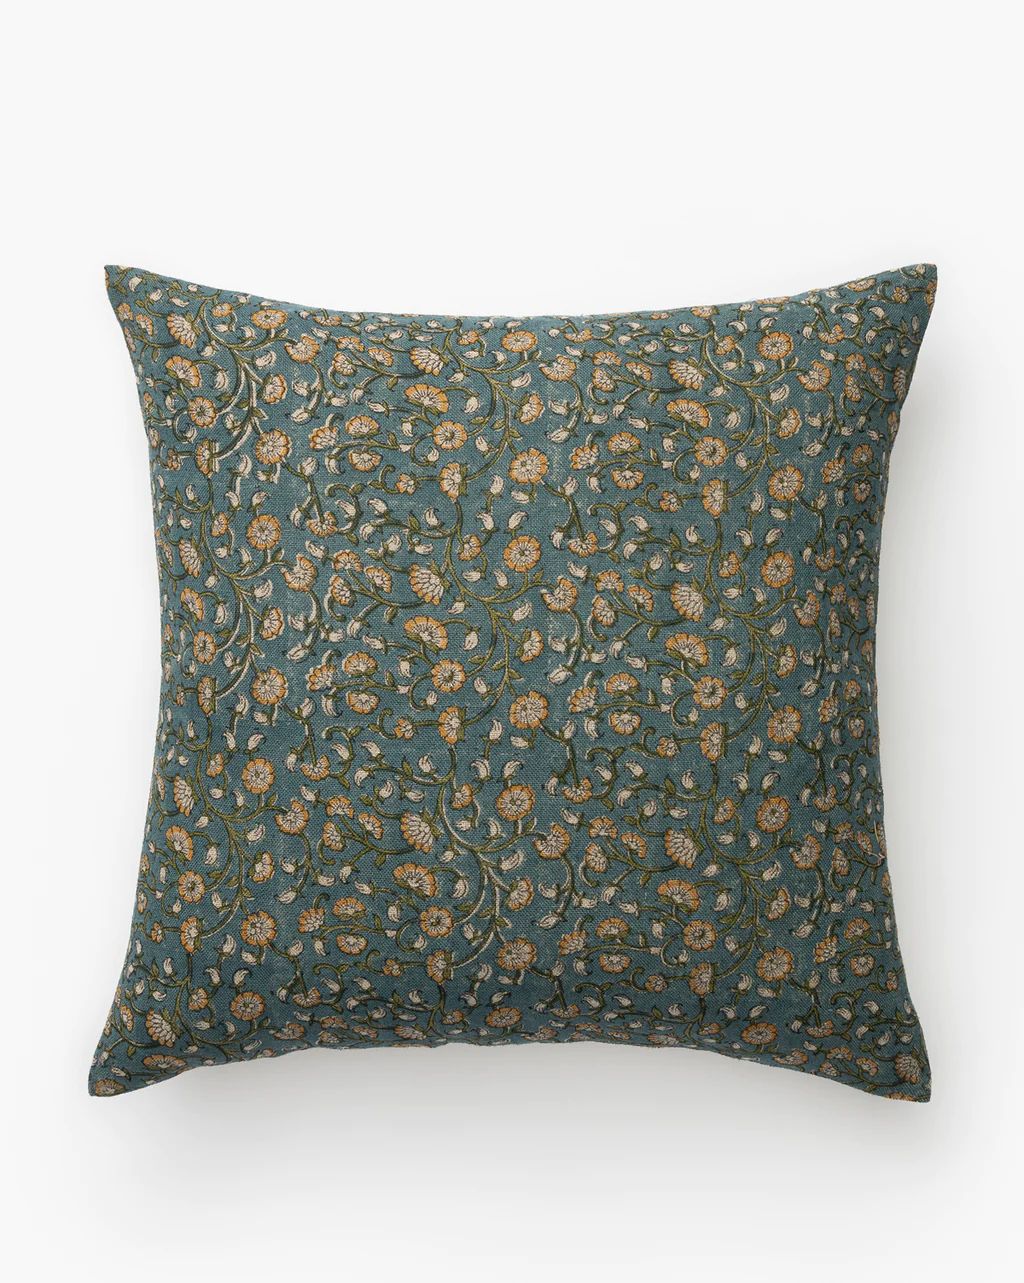 Daya Floral Pillow Cover | McGee & Co.